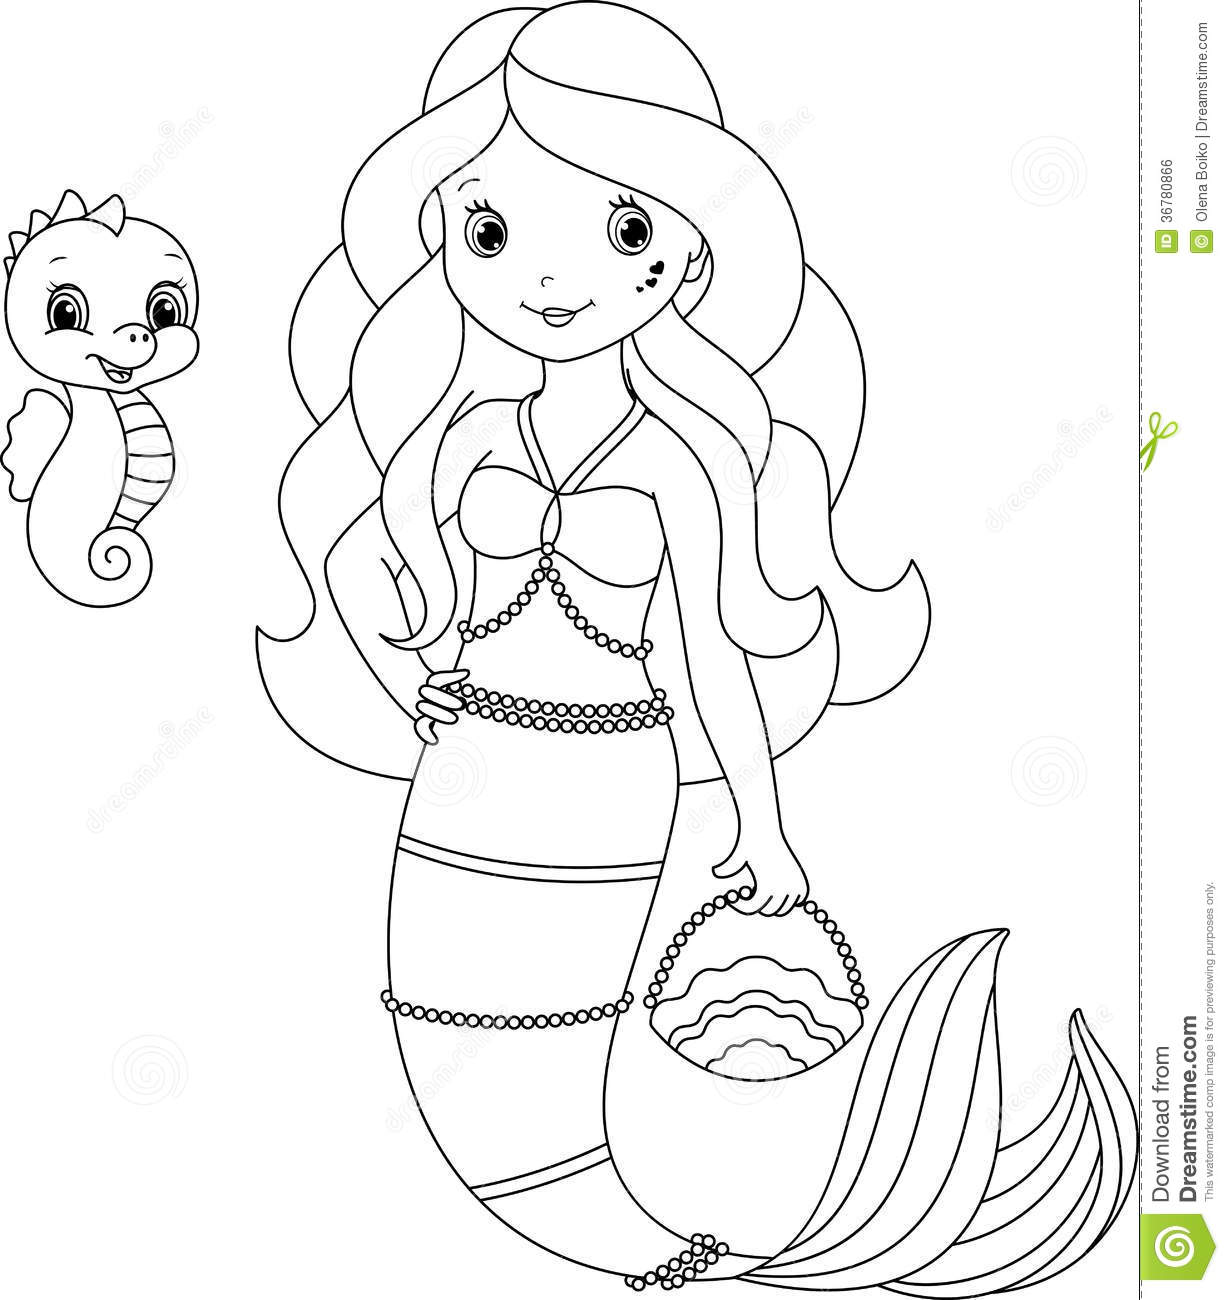 Mermaid coloring pages to download and print for free